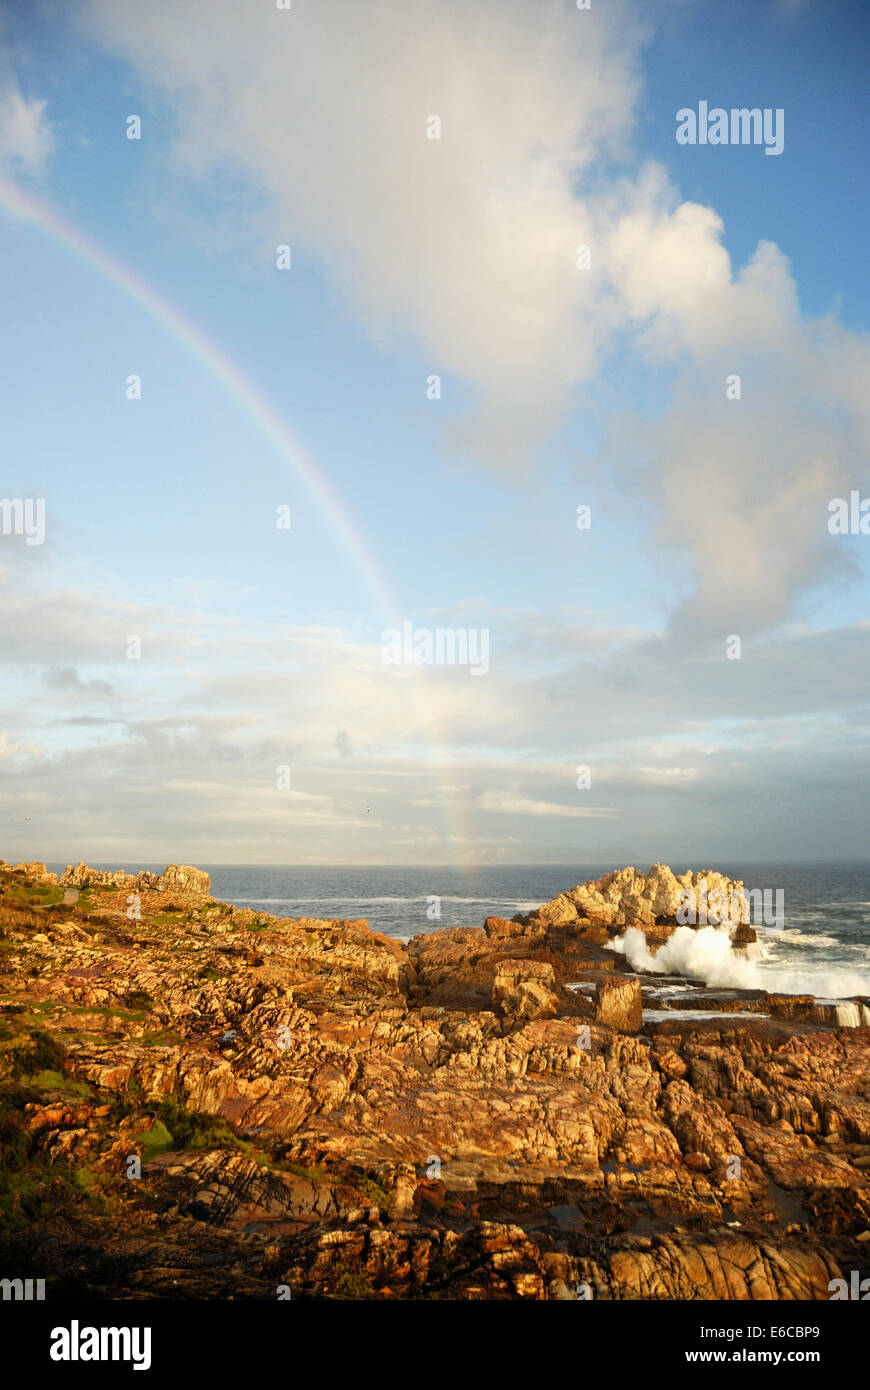 Rainbow and waves breaking on rocky shore at sunset, Hermanus, South Africa Stock Photo